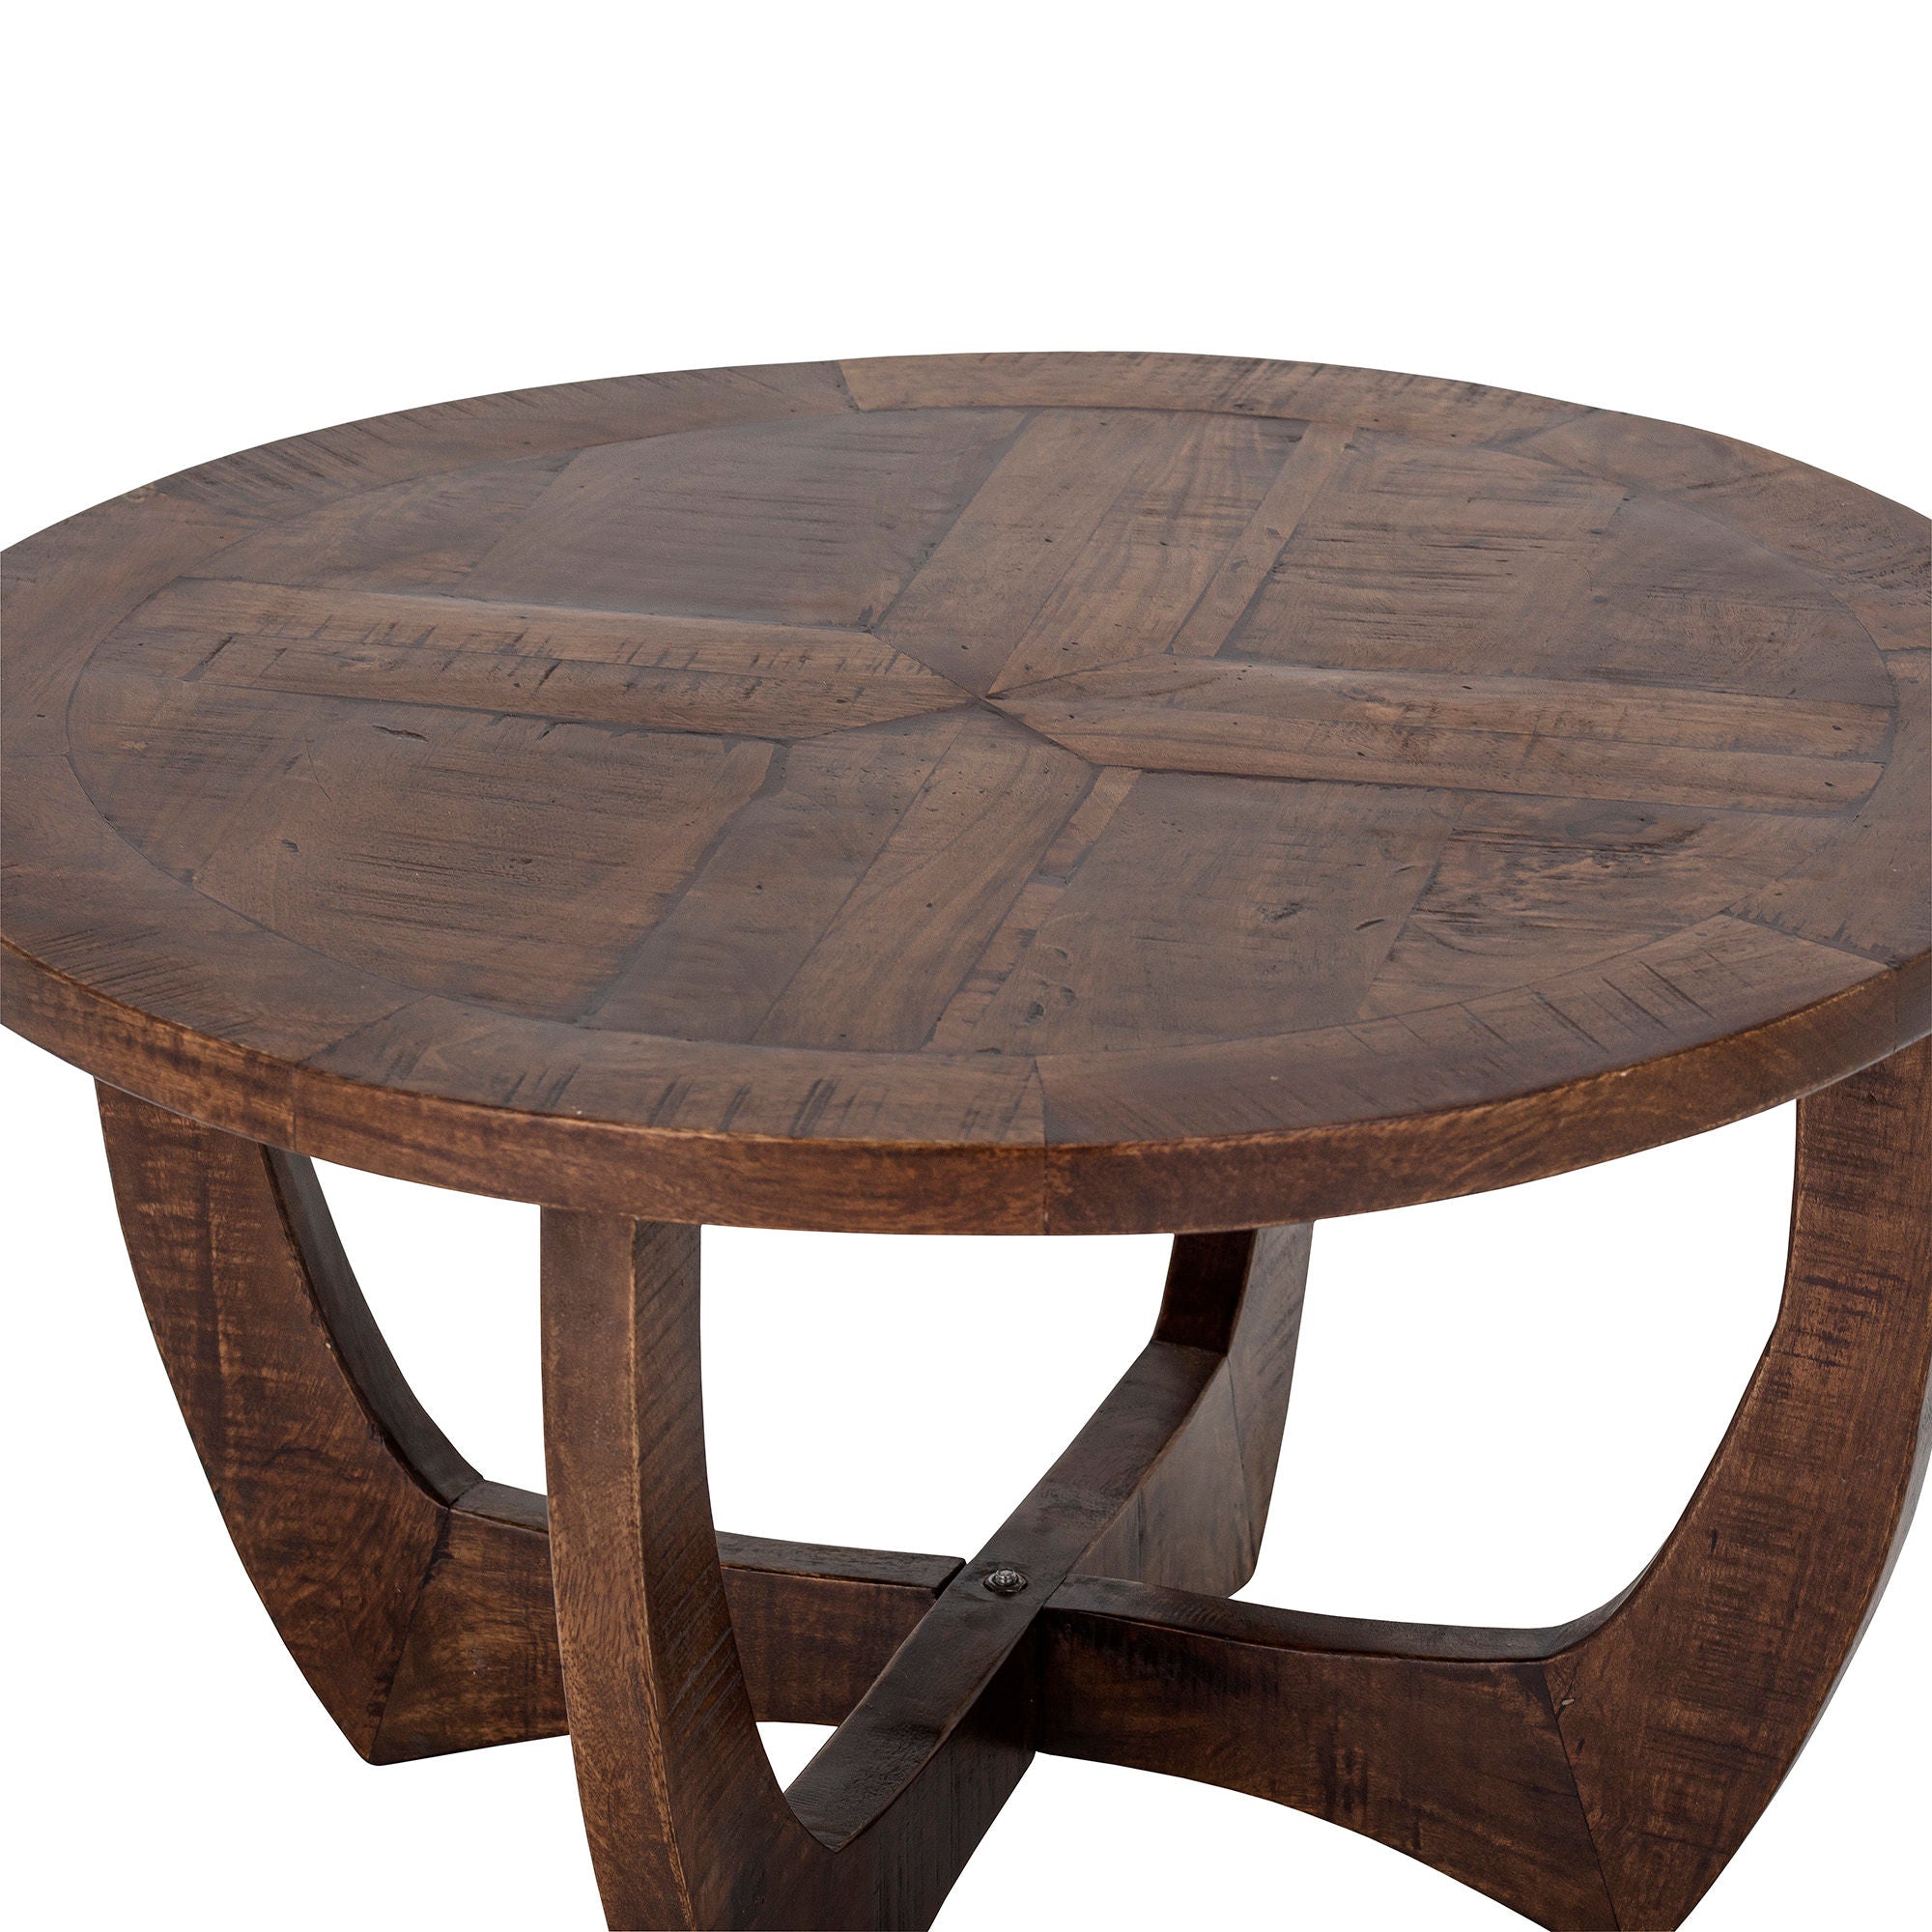 Creative Collection Jassy Coffee Table, Brown, Mango